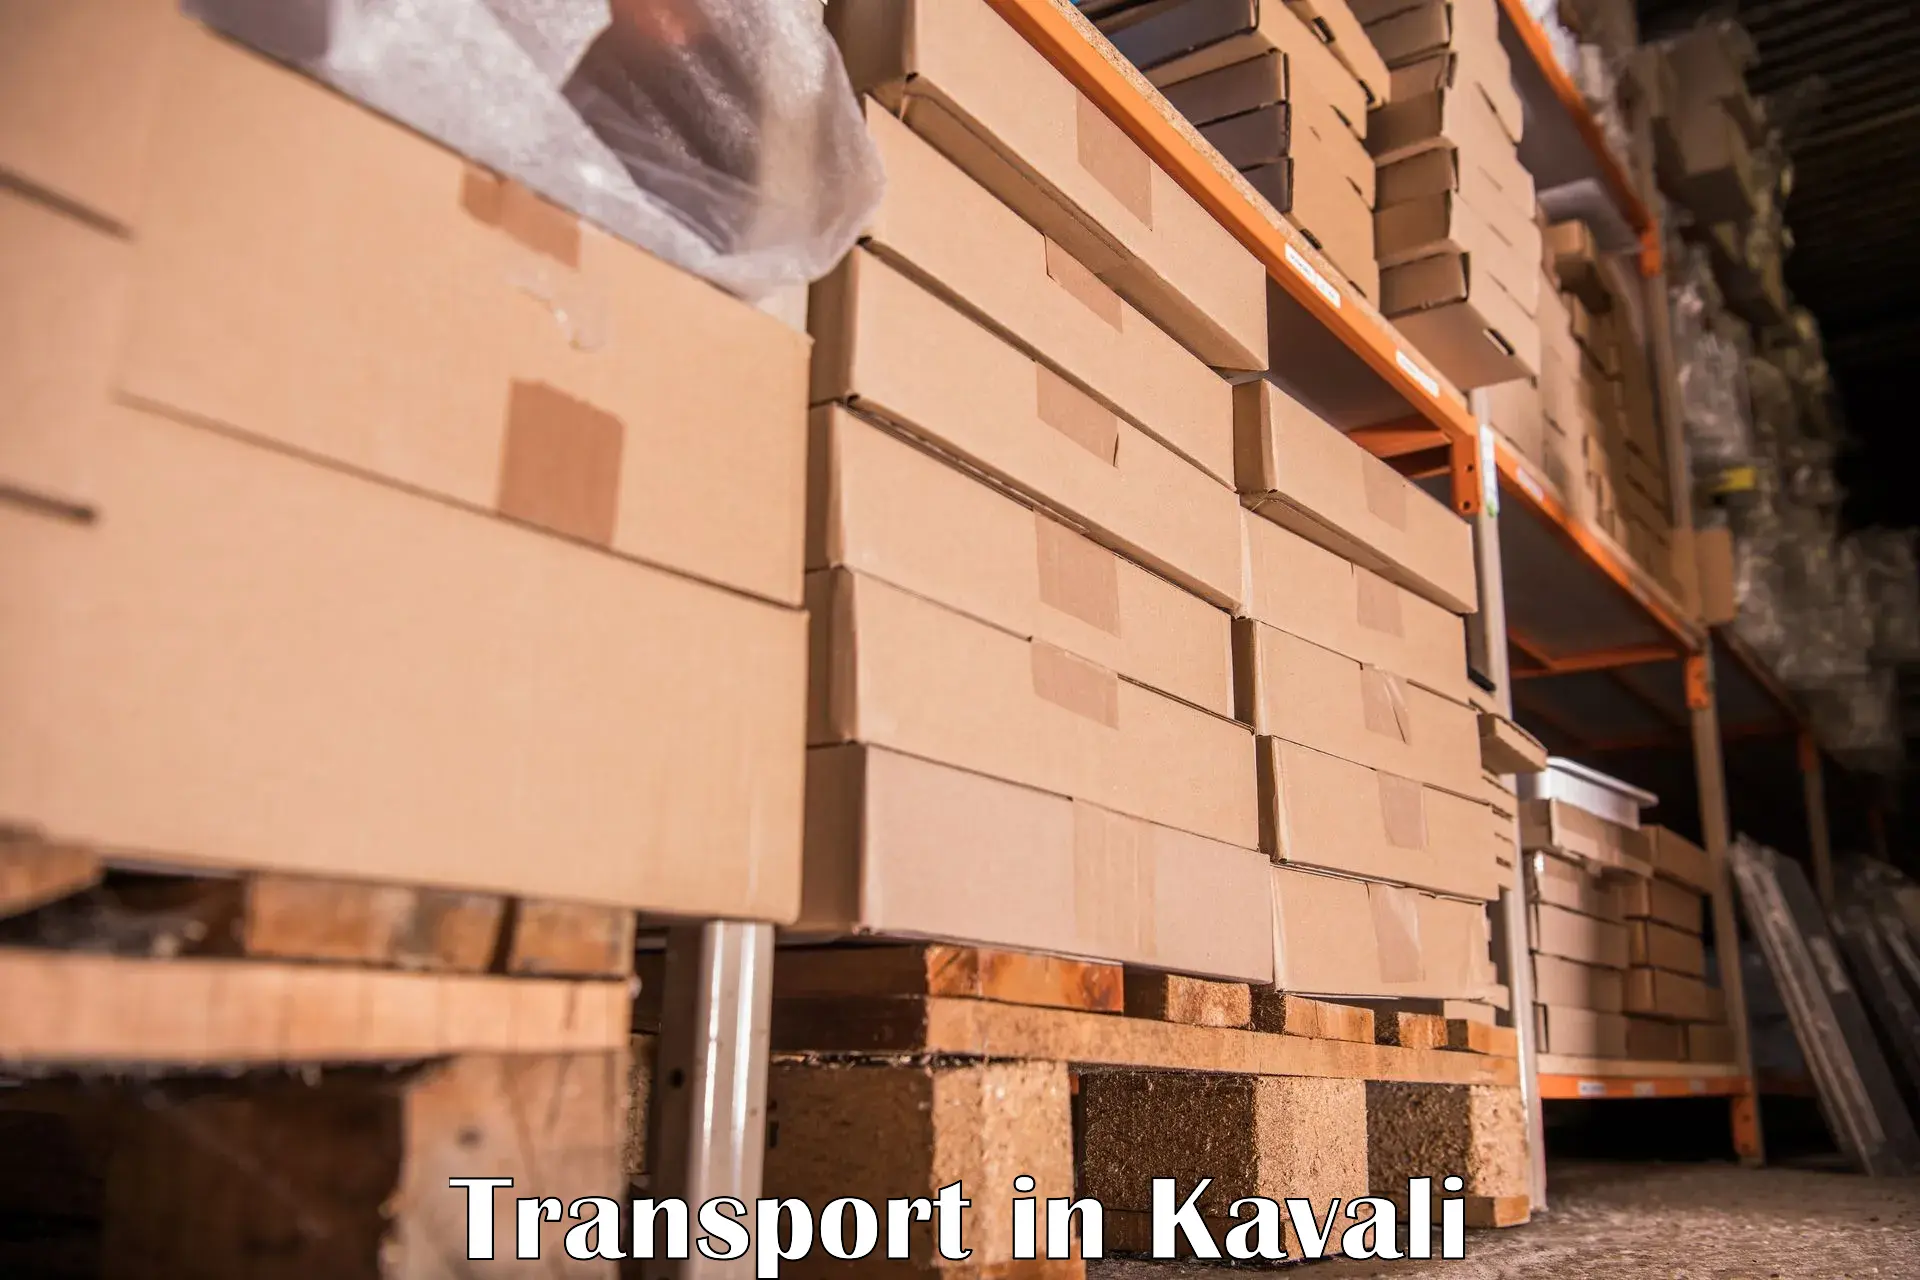 Daily parcel service transport in Kavali